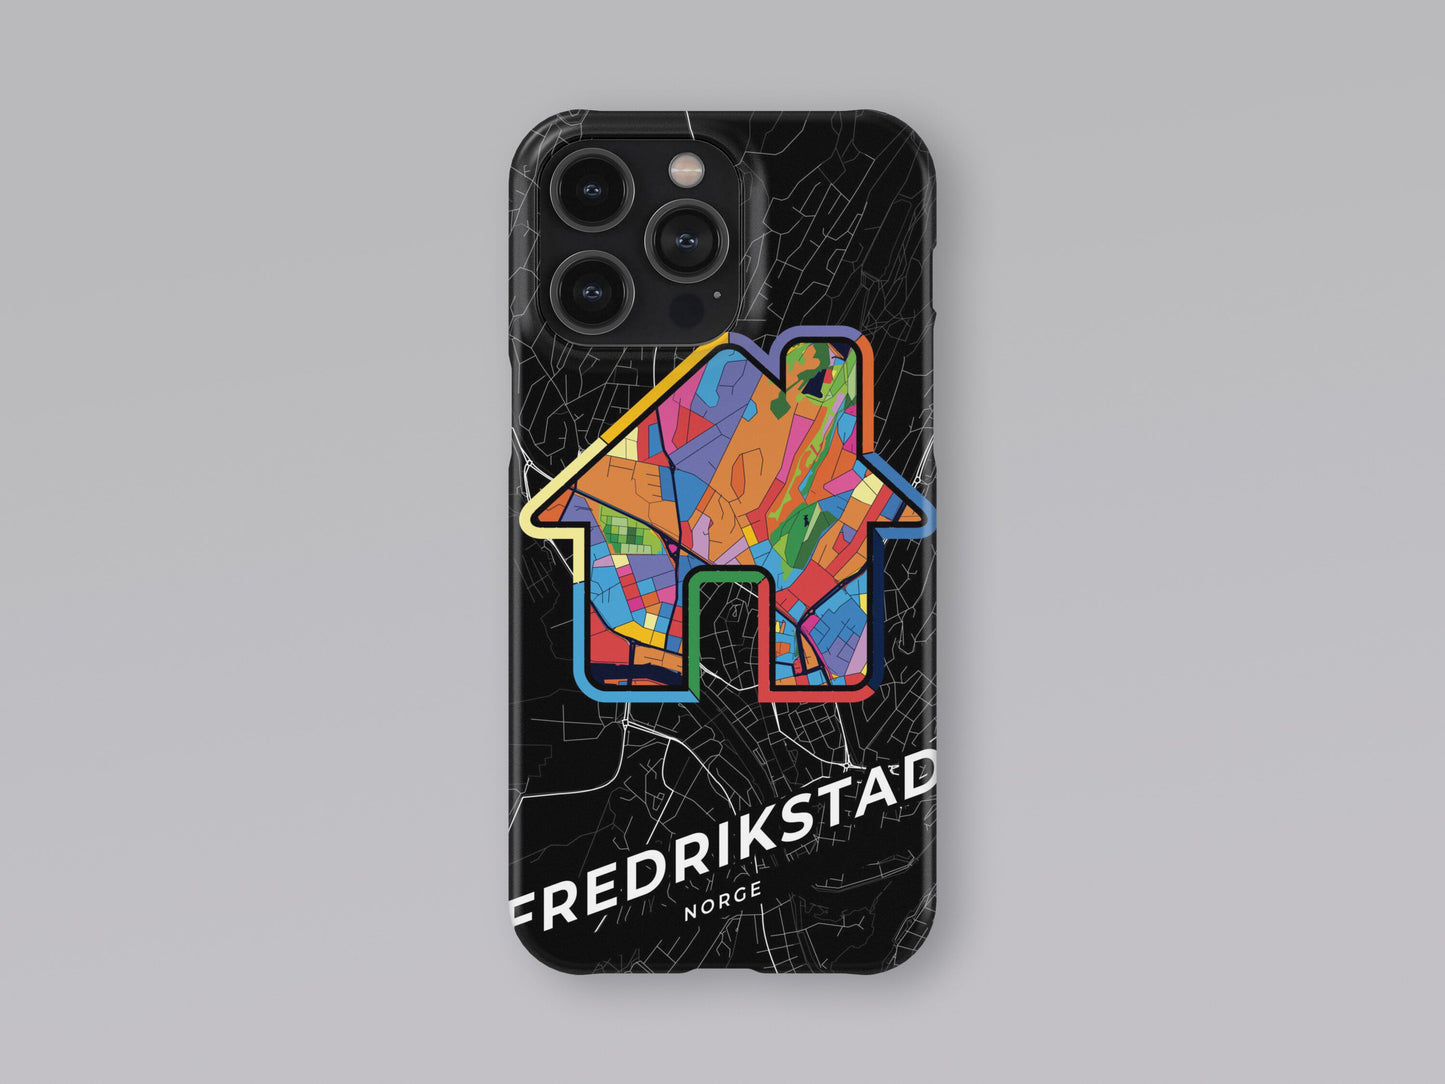 Fredrikstad Norway slim phone case with colorful icon. Birthday, wedding or housewarming gift. Couple match cases. 3